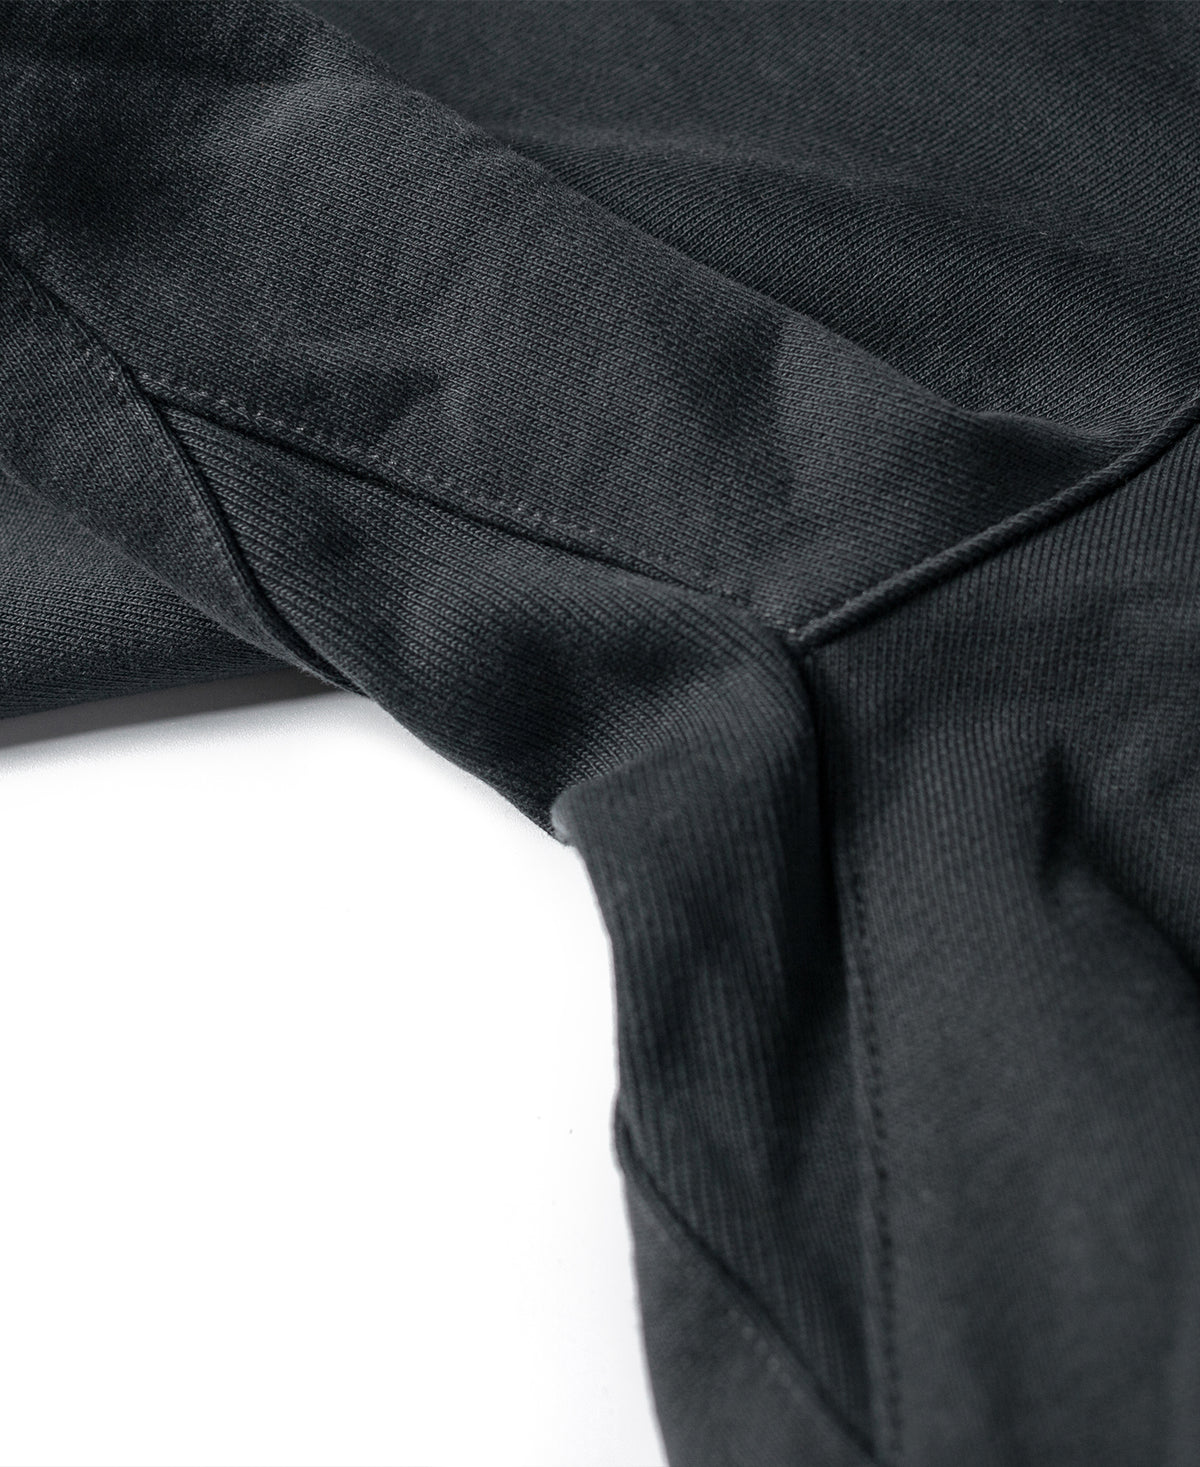 15 oz French Terry Sweat Shorts - Black